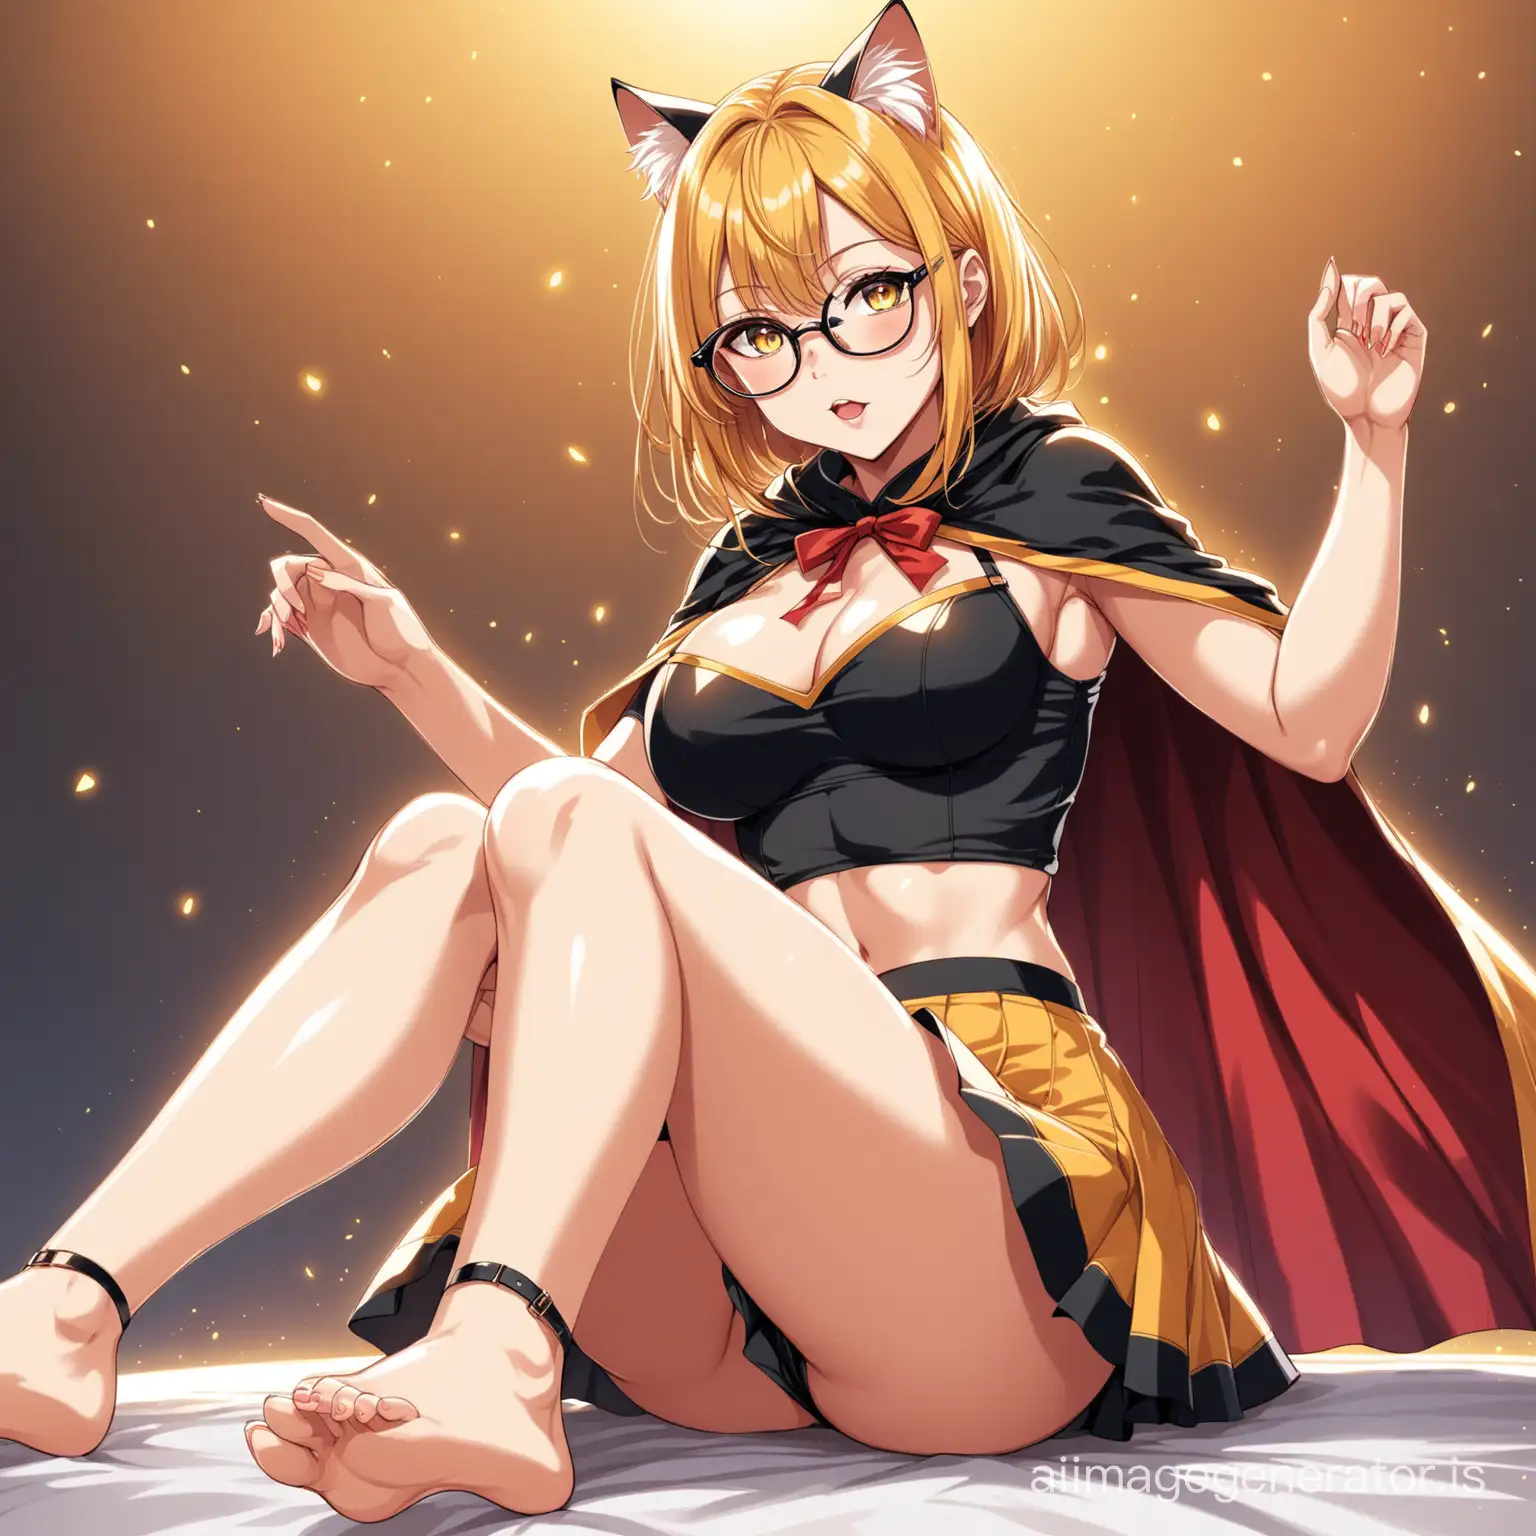 Stylish-Anime-Girl-with-Cape-and-Cat-Eye-Glasses